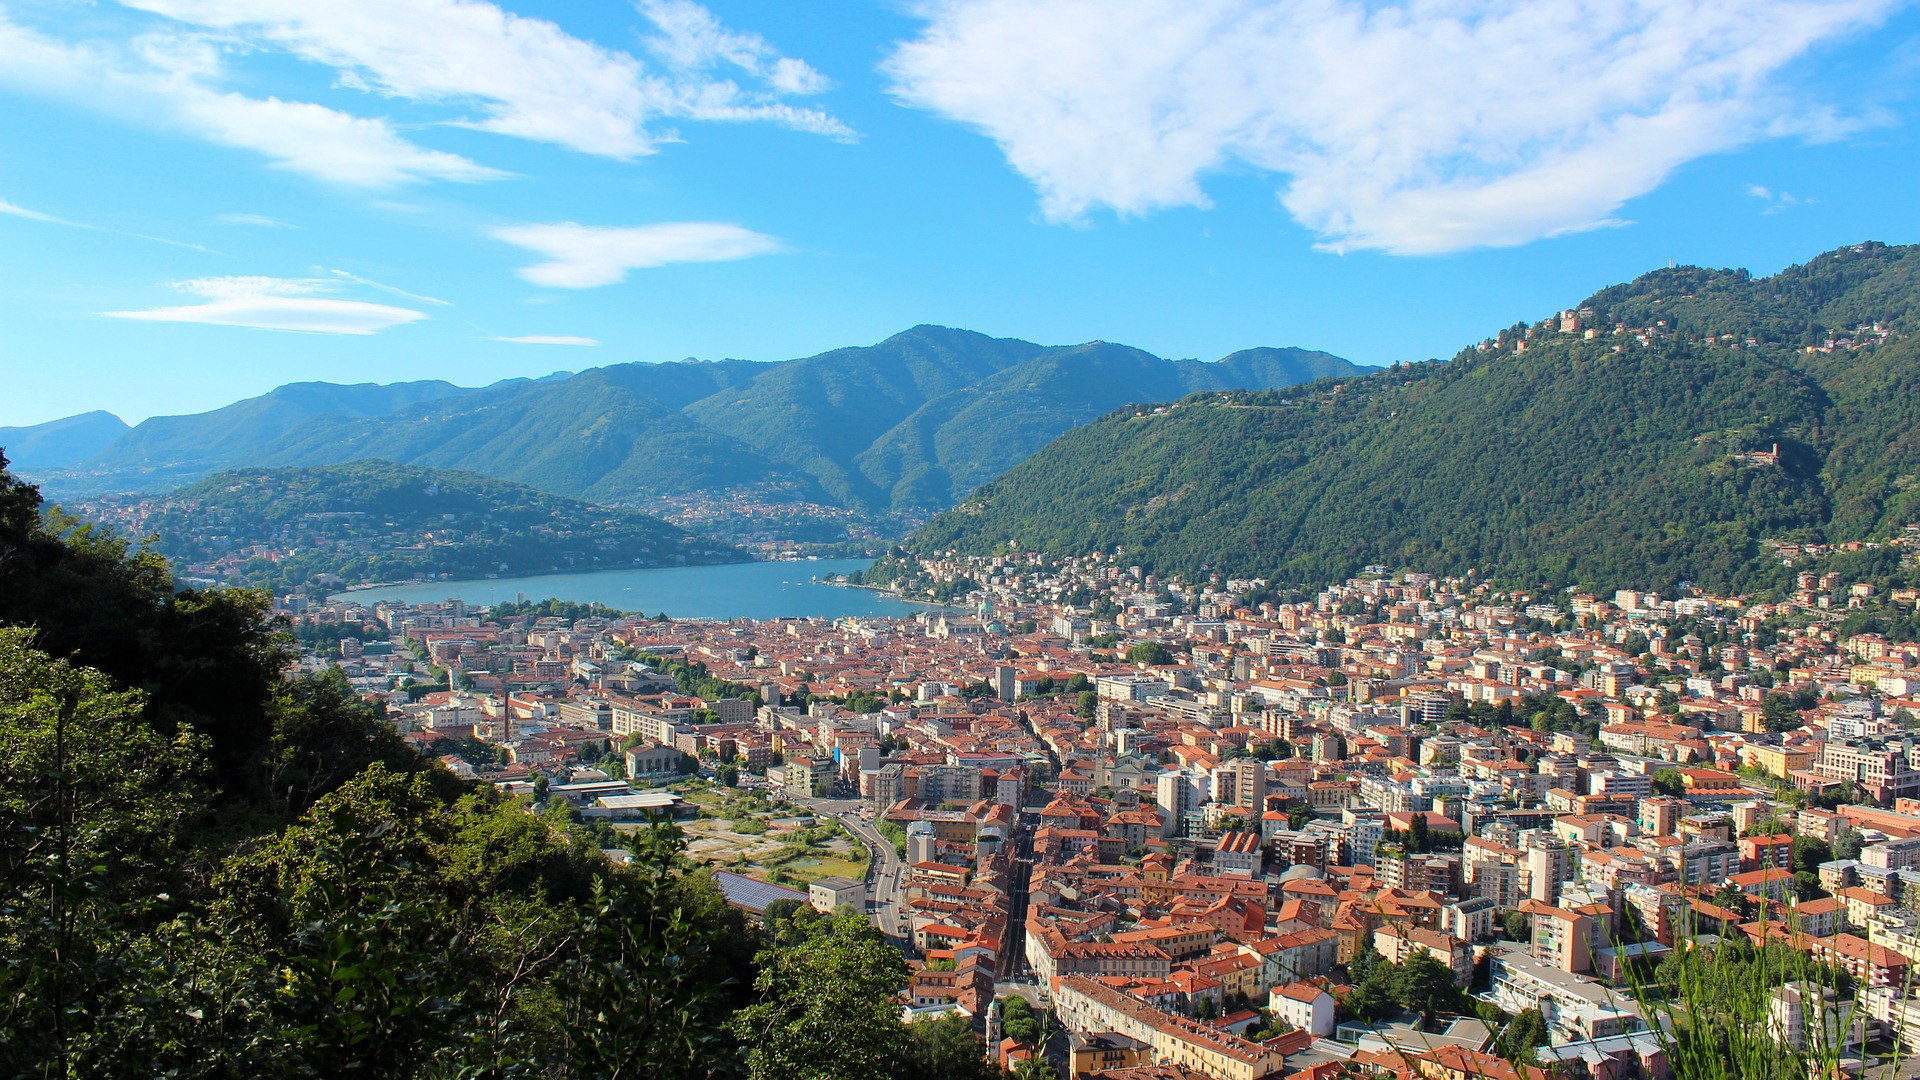 panoramic view of lake como in italy with blue sky meeting mountains, lake and township.